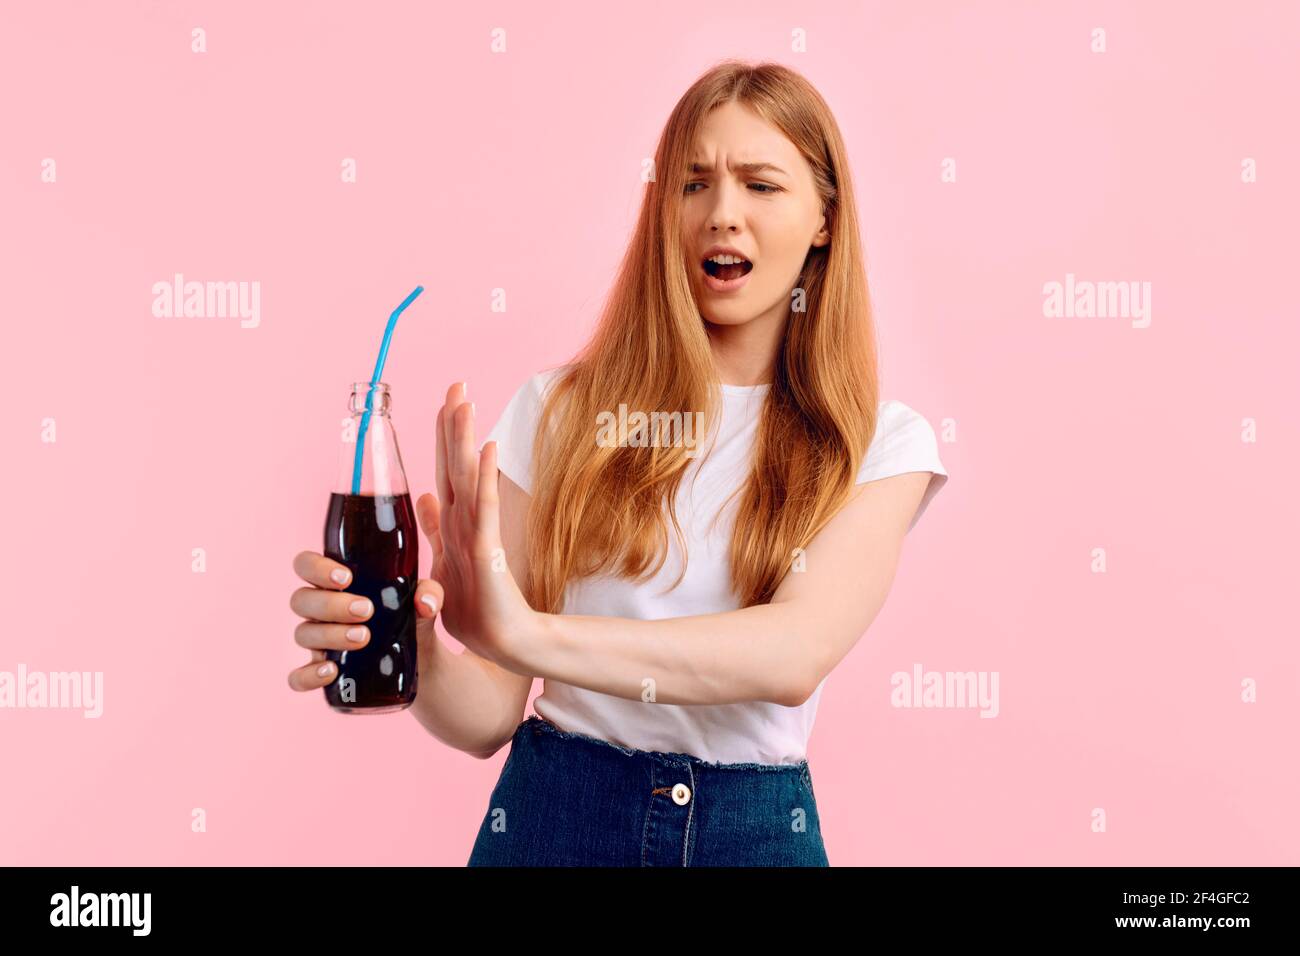 Young woman, against carbonated drinks, refuse carbonated soft drinks, on pink background Stock Photo